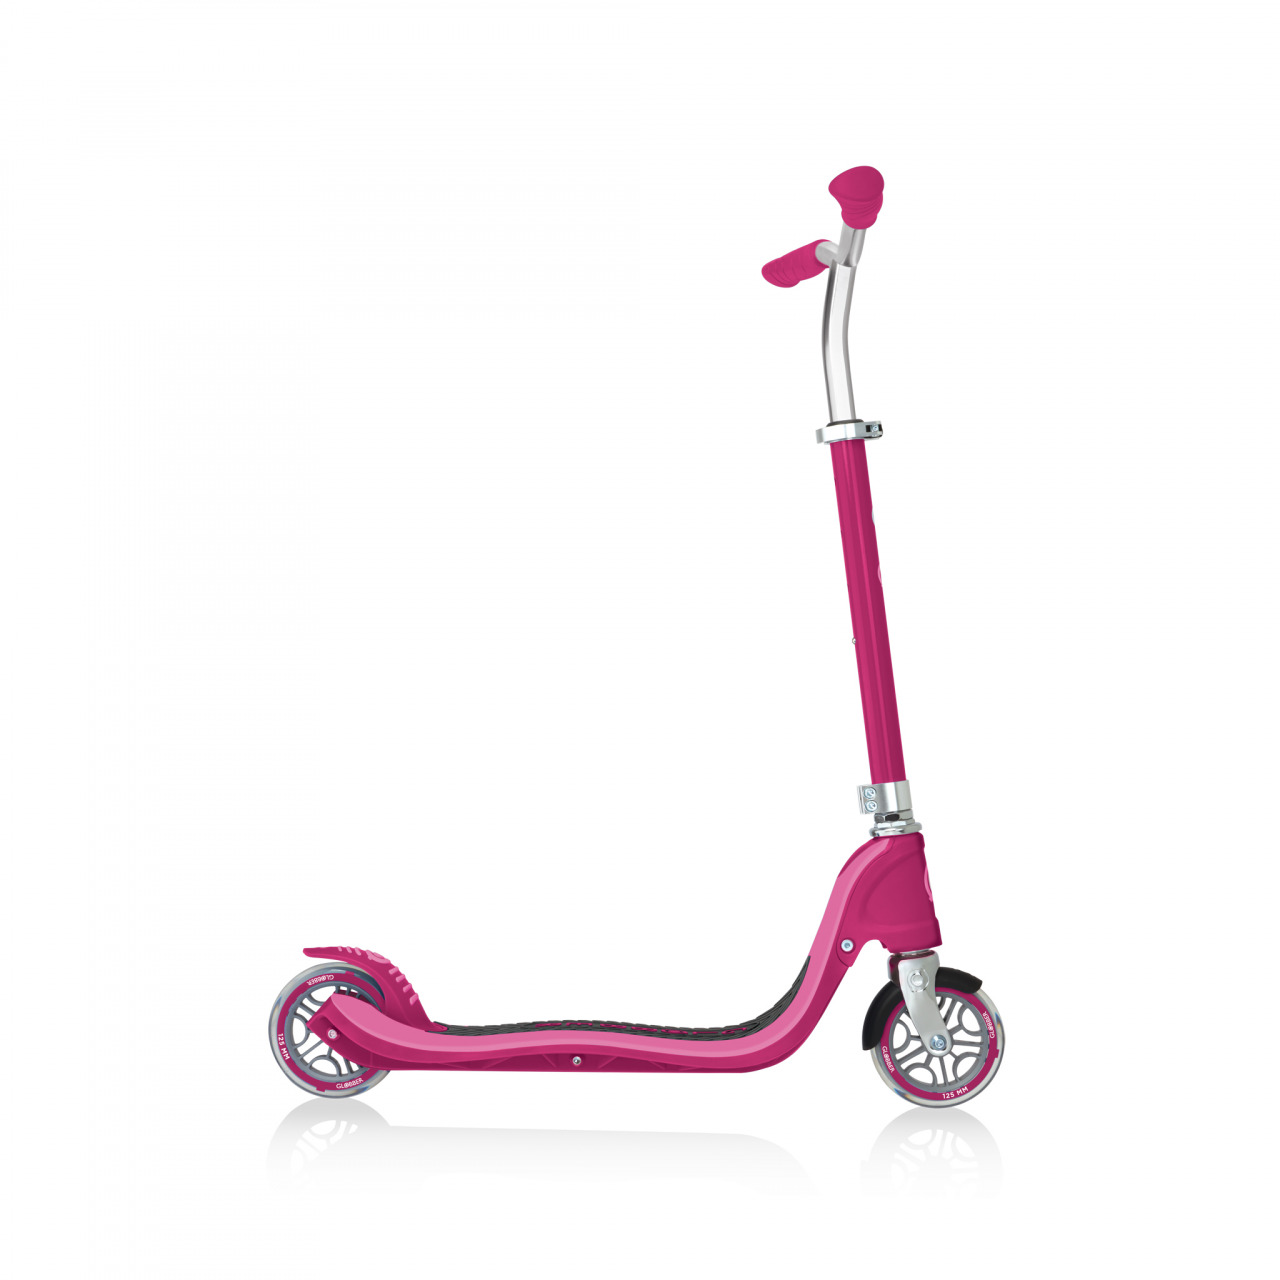 770 114 Scooter For Teens